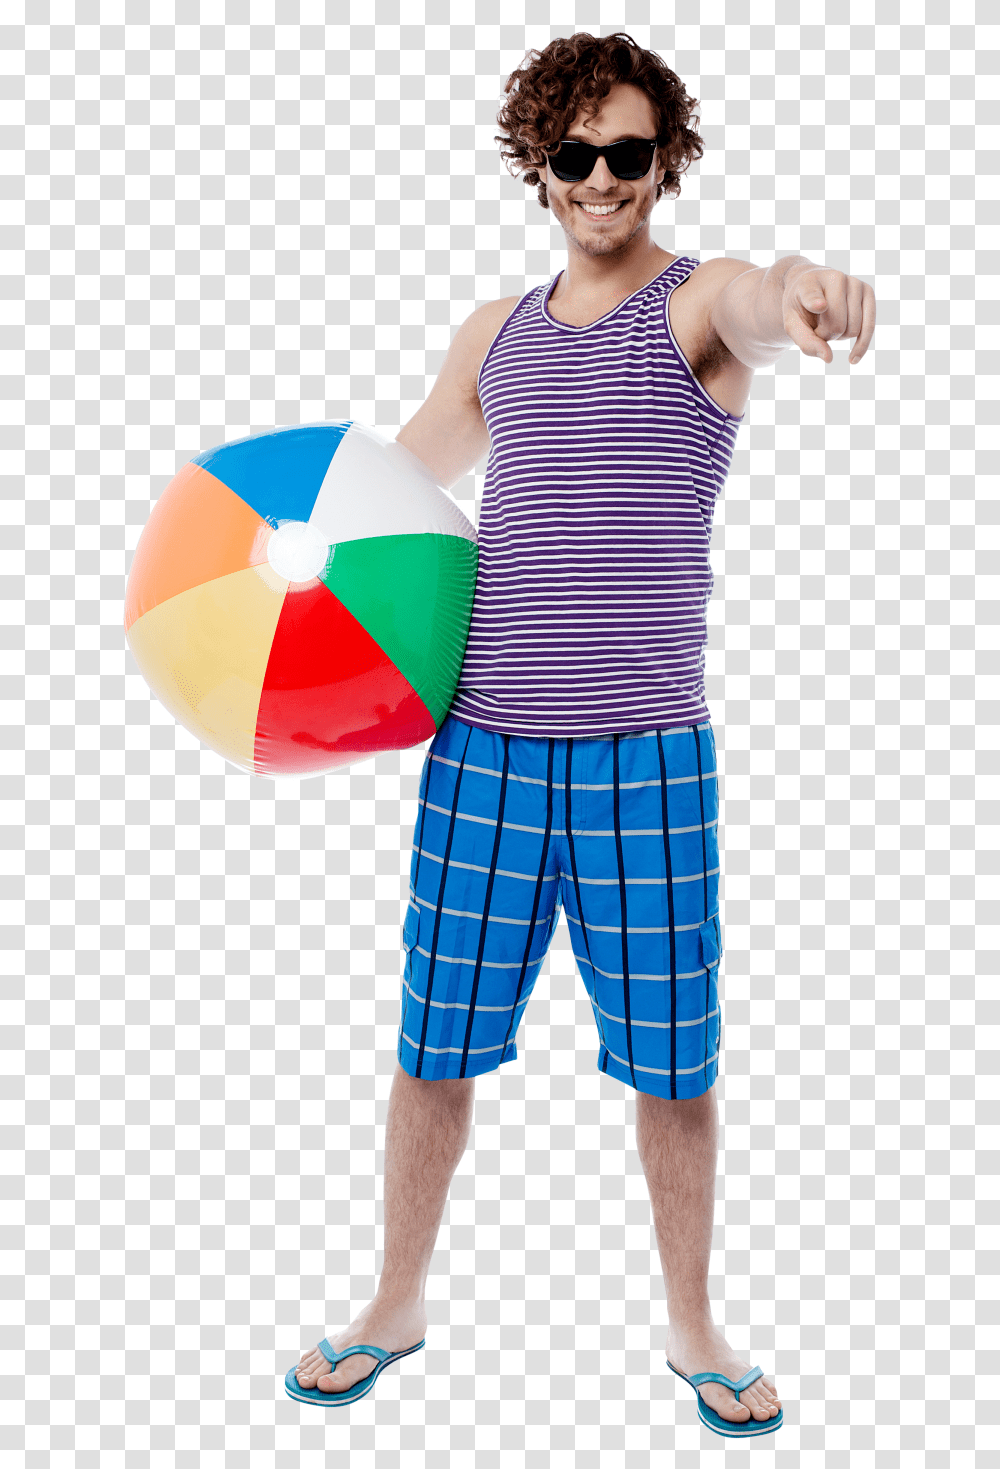 Men With Beach Ball Image Kids Beach, Person, Pants, Sunglasses Transparent Png